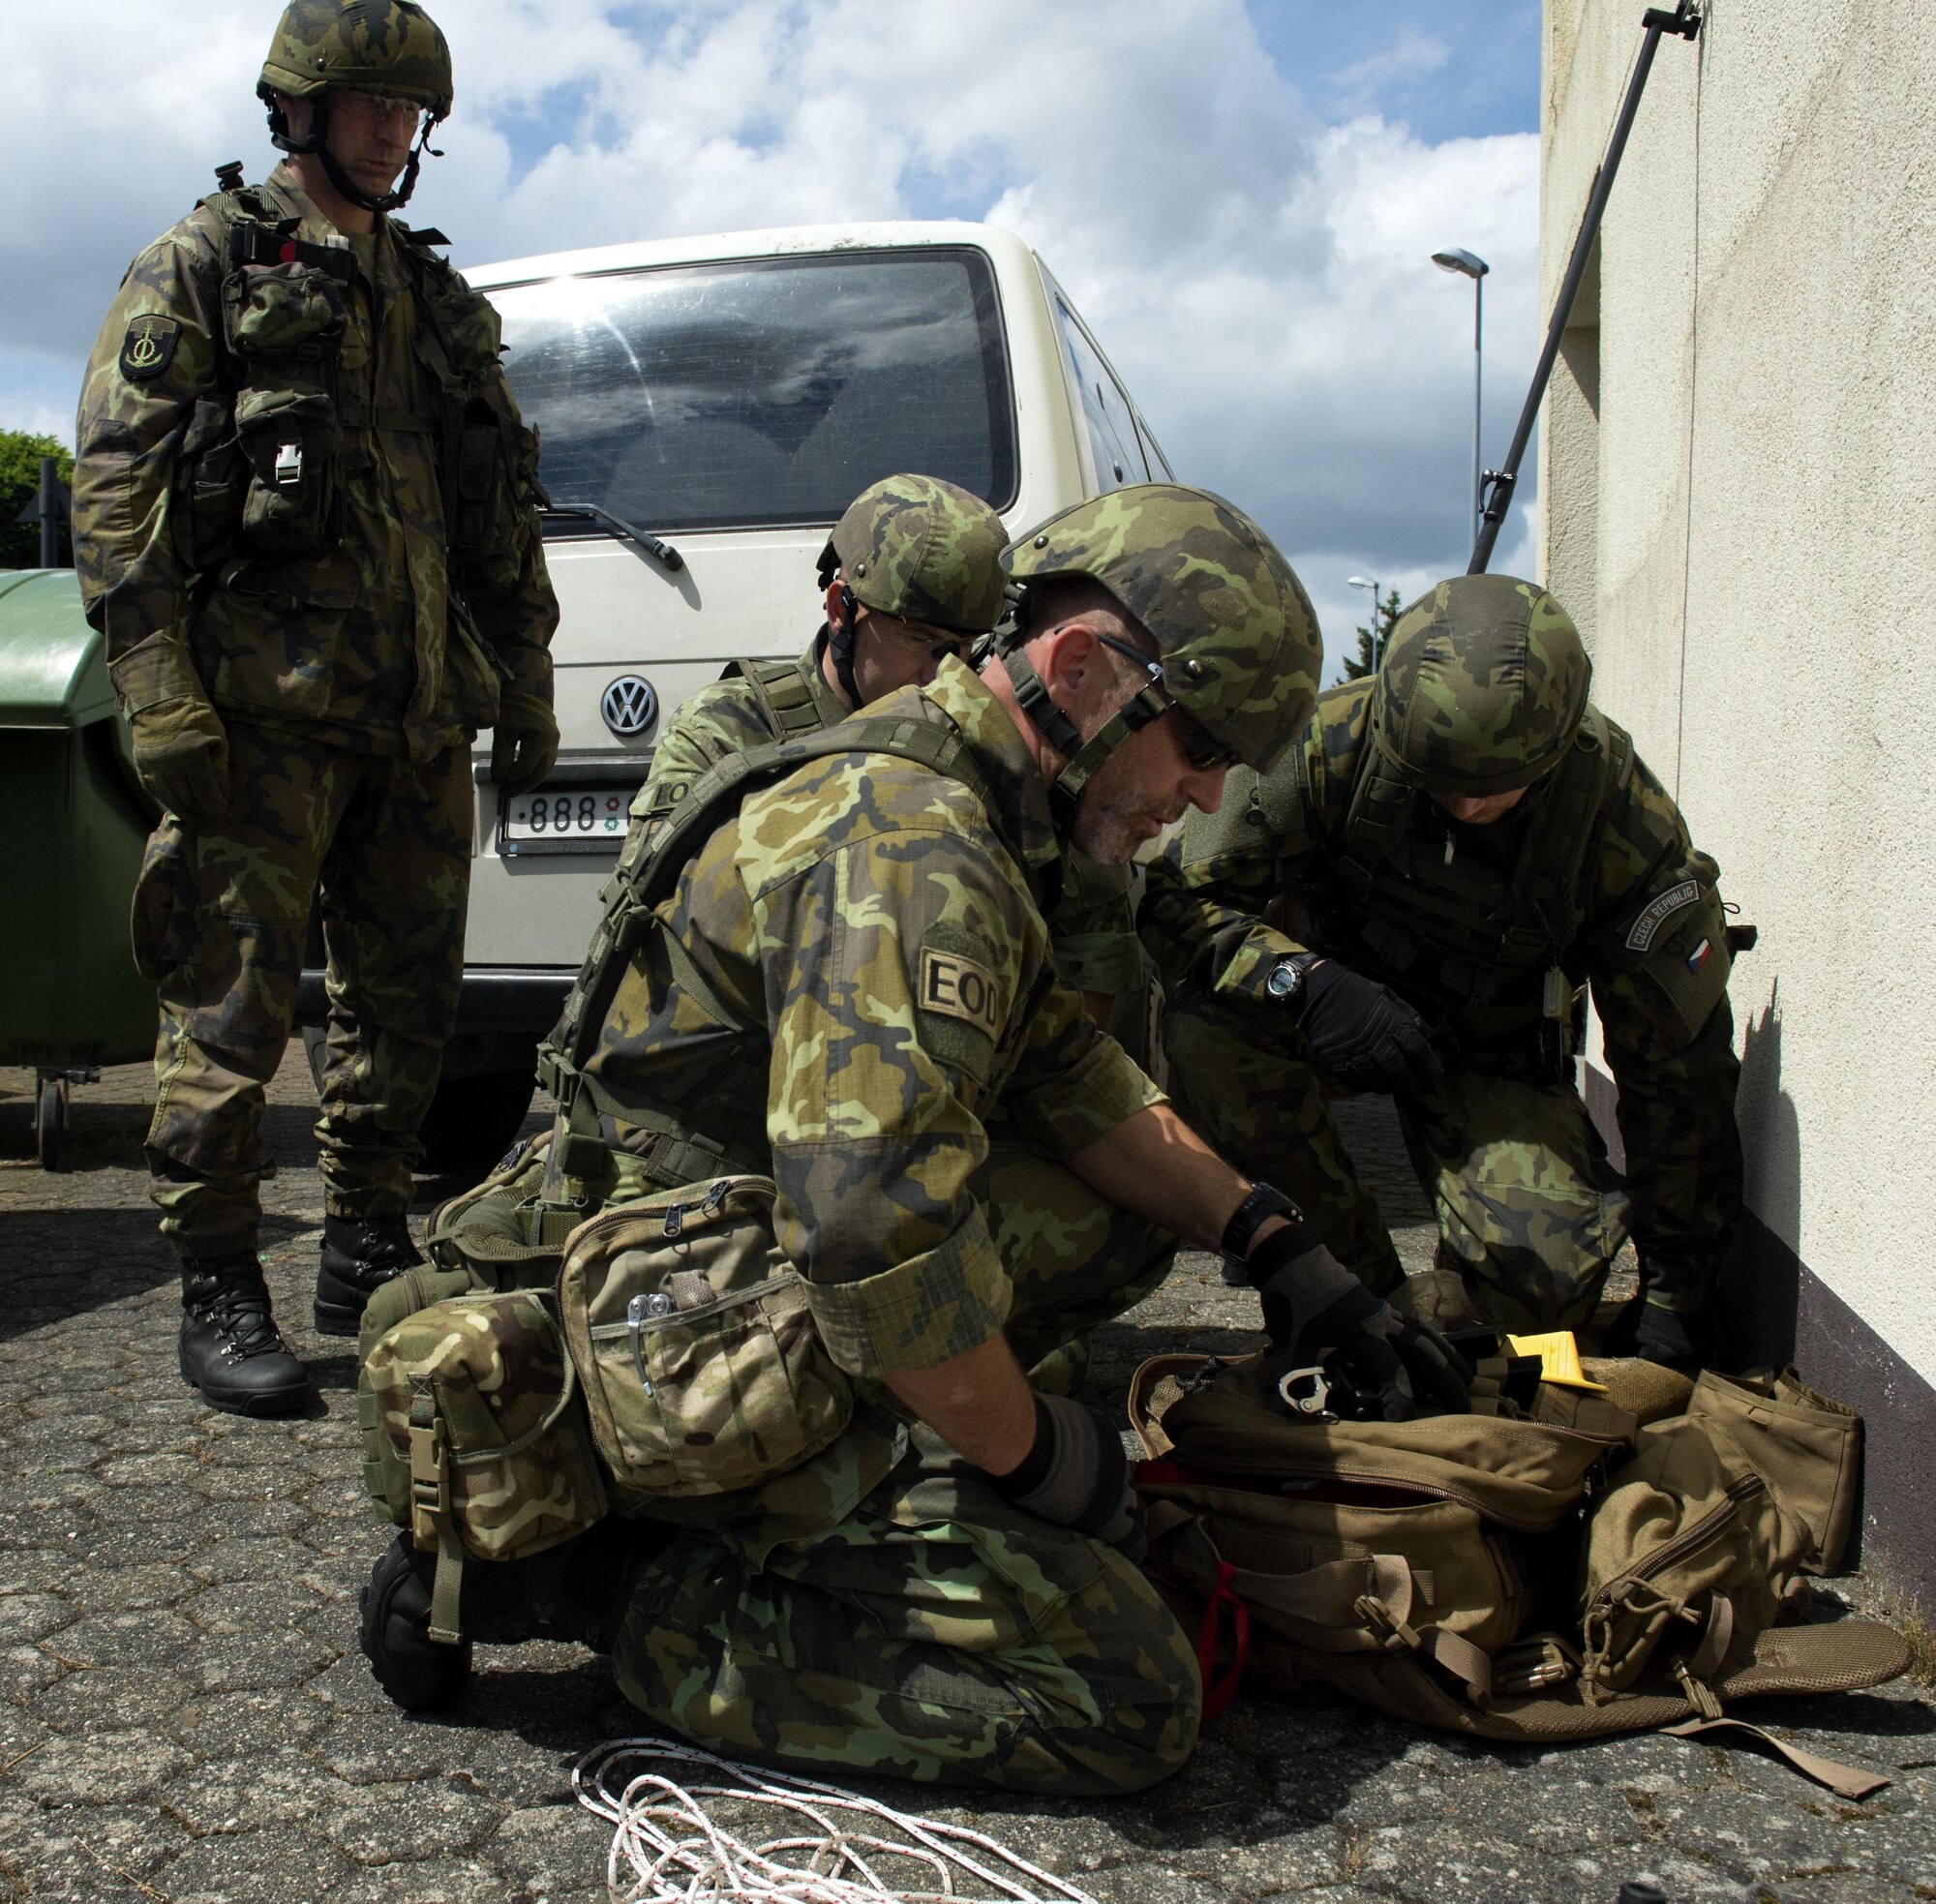 Army of the Czech Republic, explosive ordnance disposal members, prepare to disarm a simulated improvised explosive device during the IED Rodeo exercise at Spangdahlem Air Base, Germany, July 27, 2016. This multilateral exercise focused on locating and disarming improvised explosive devices which involved EOD members from the U.S., Czech Republic, Germany and Belgium. (U.S. Air Force photo by Airman 1st Class Preston L. Cherry/Realeased)